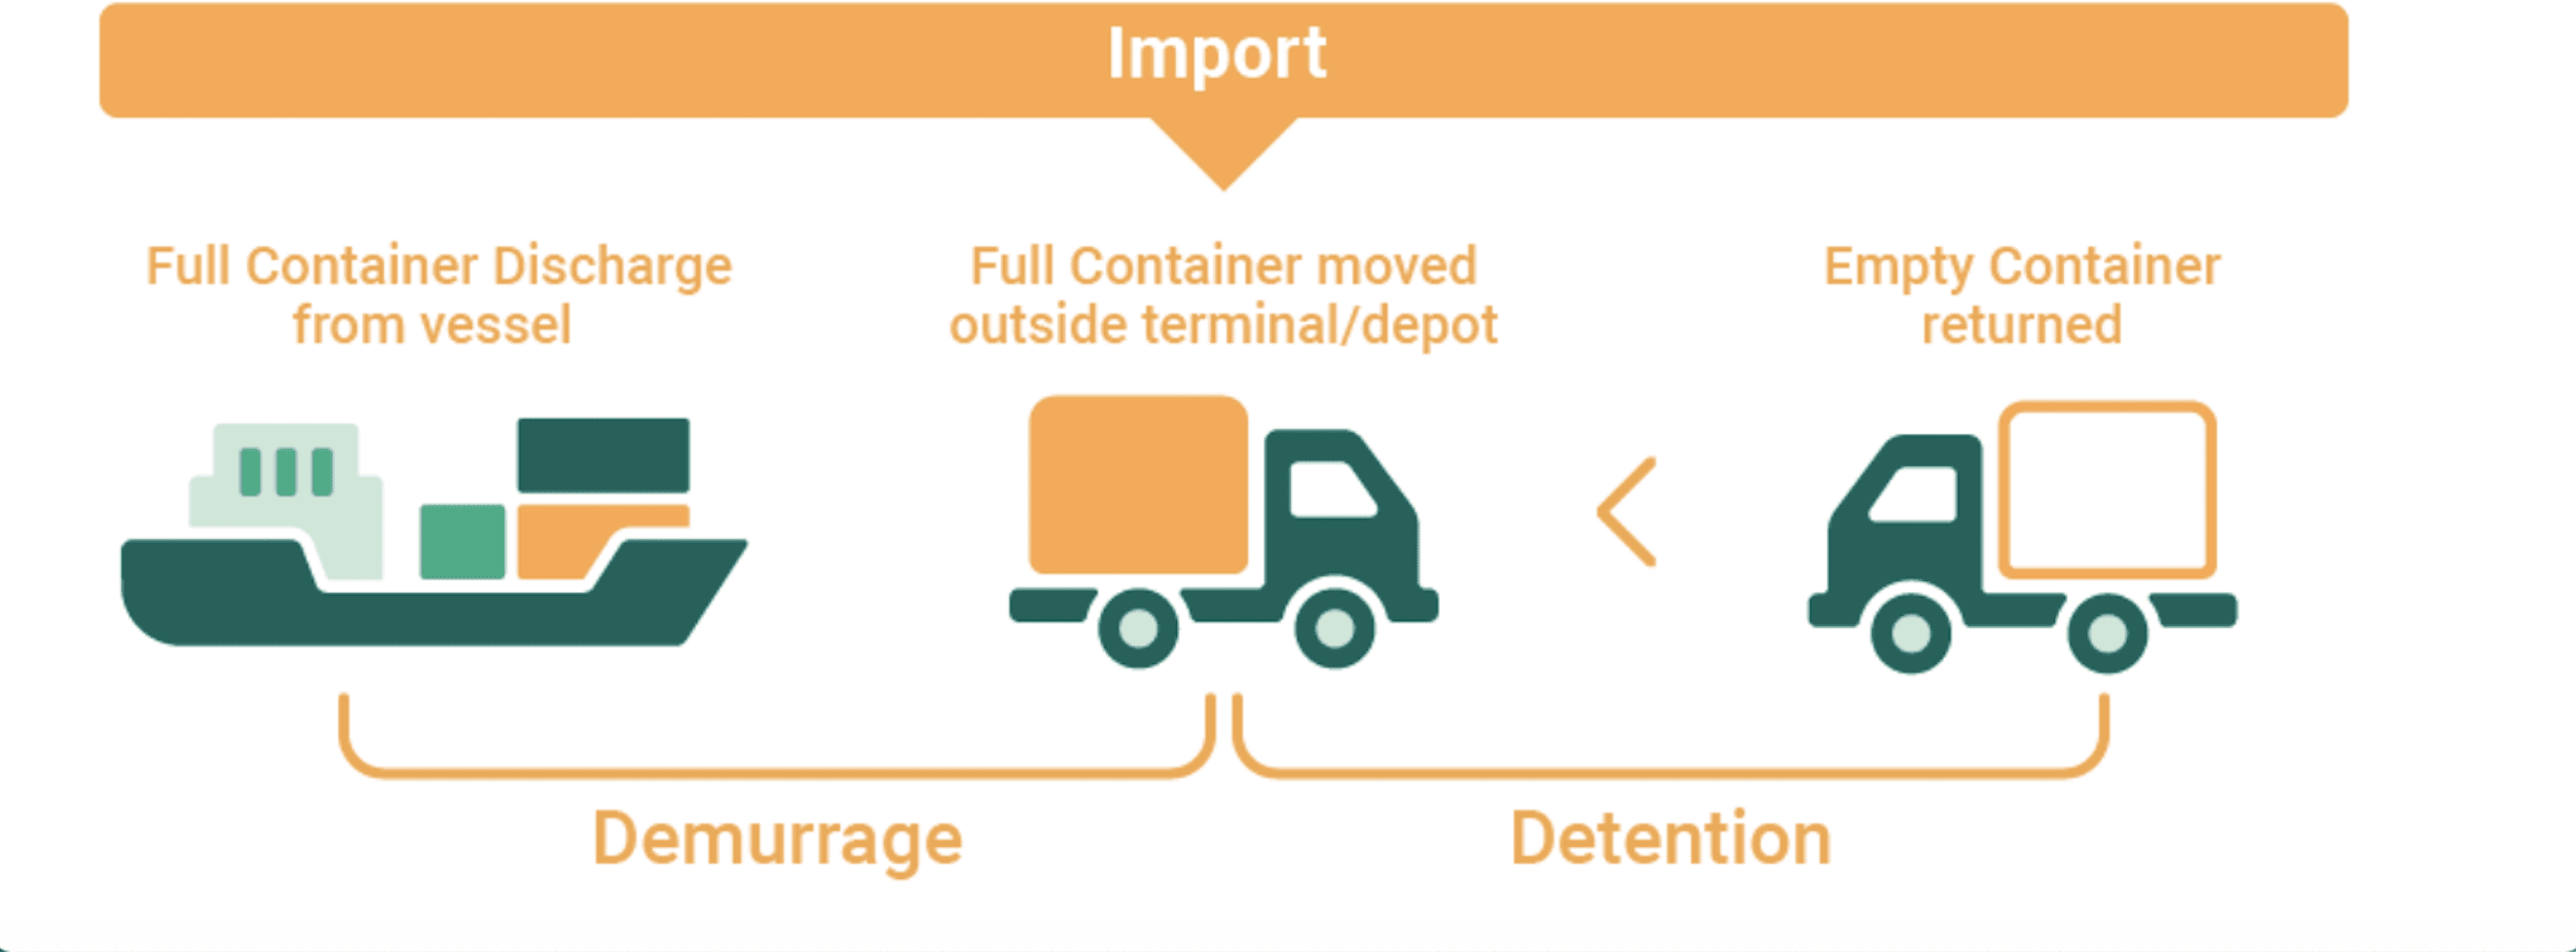 Demurrage and Detention infographic